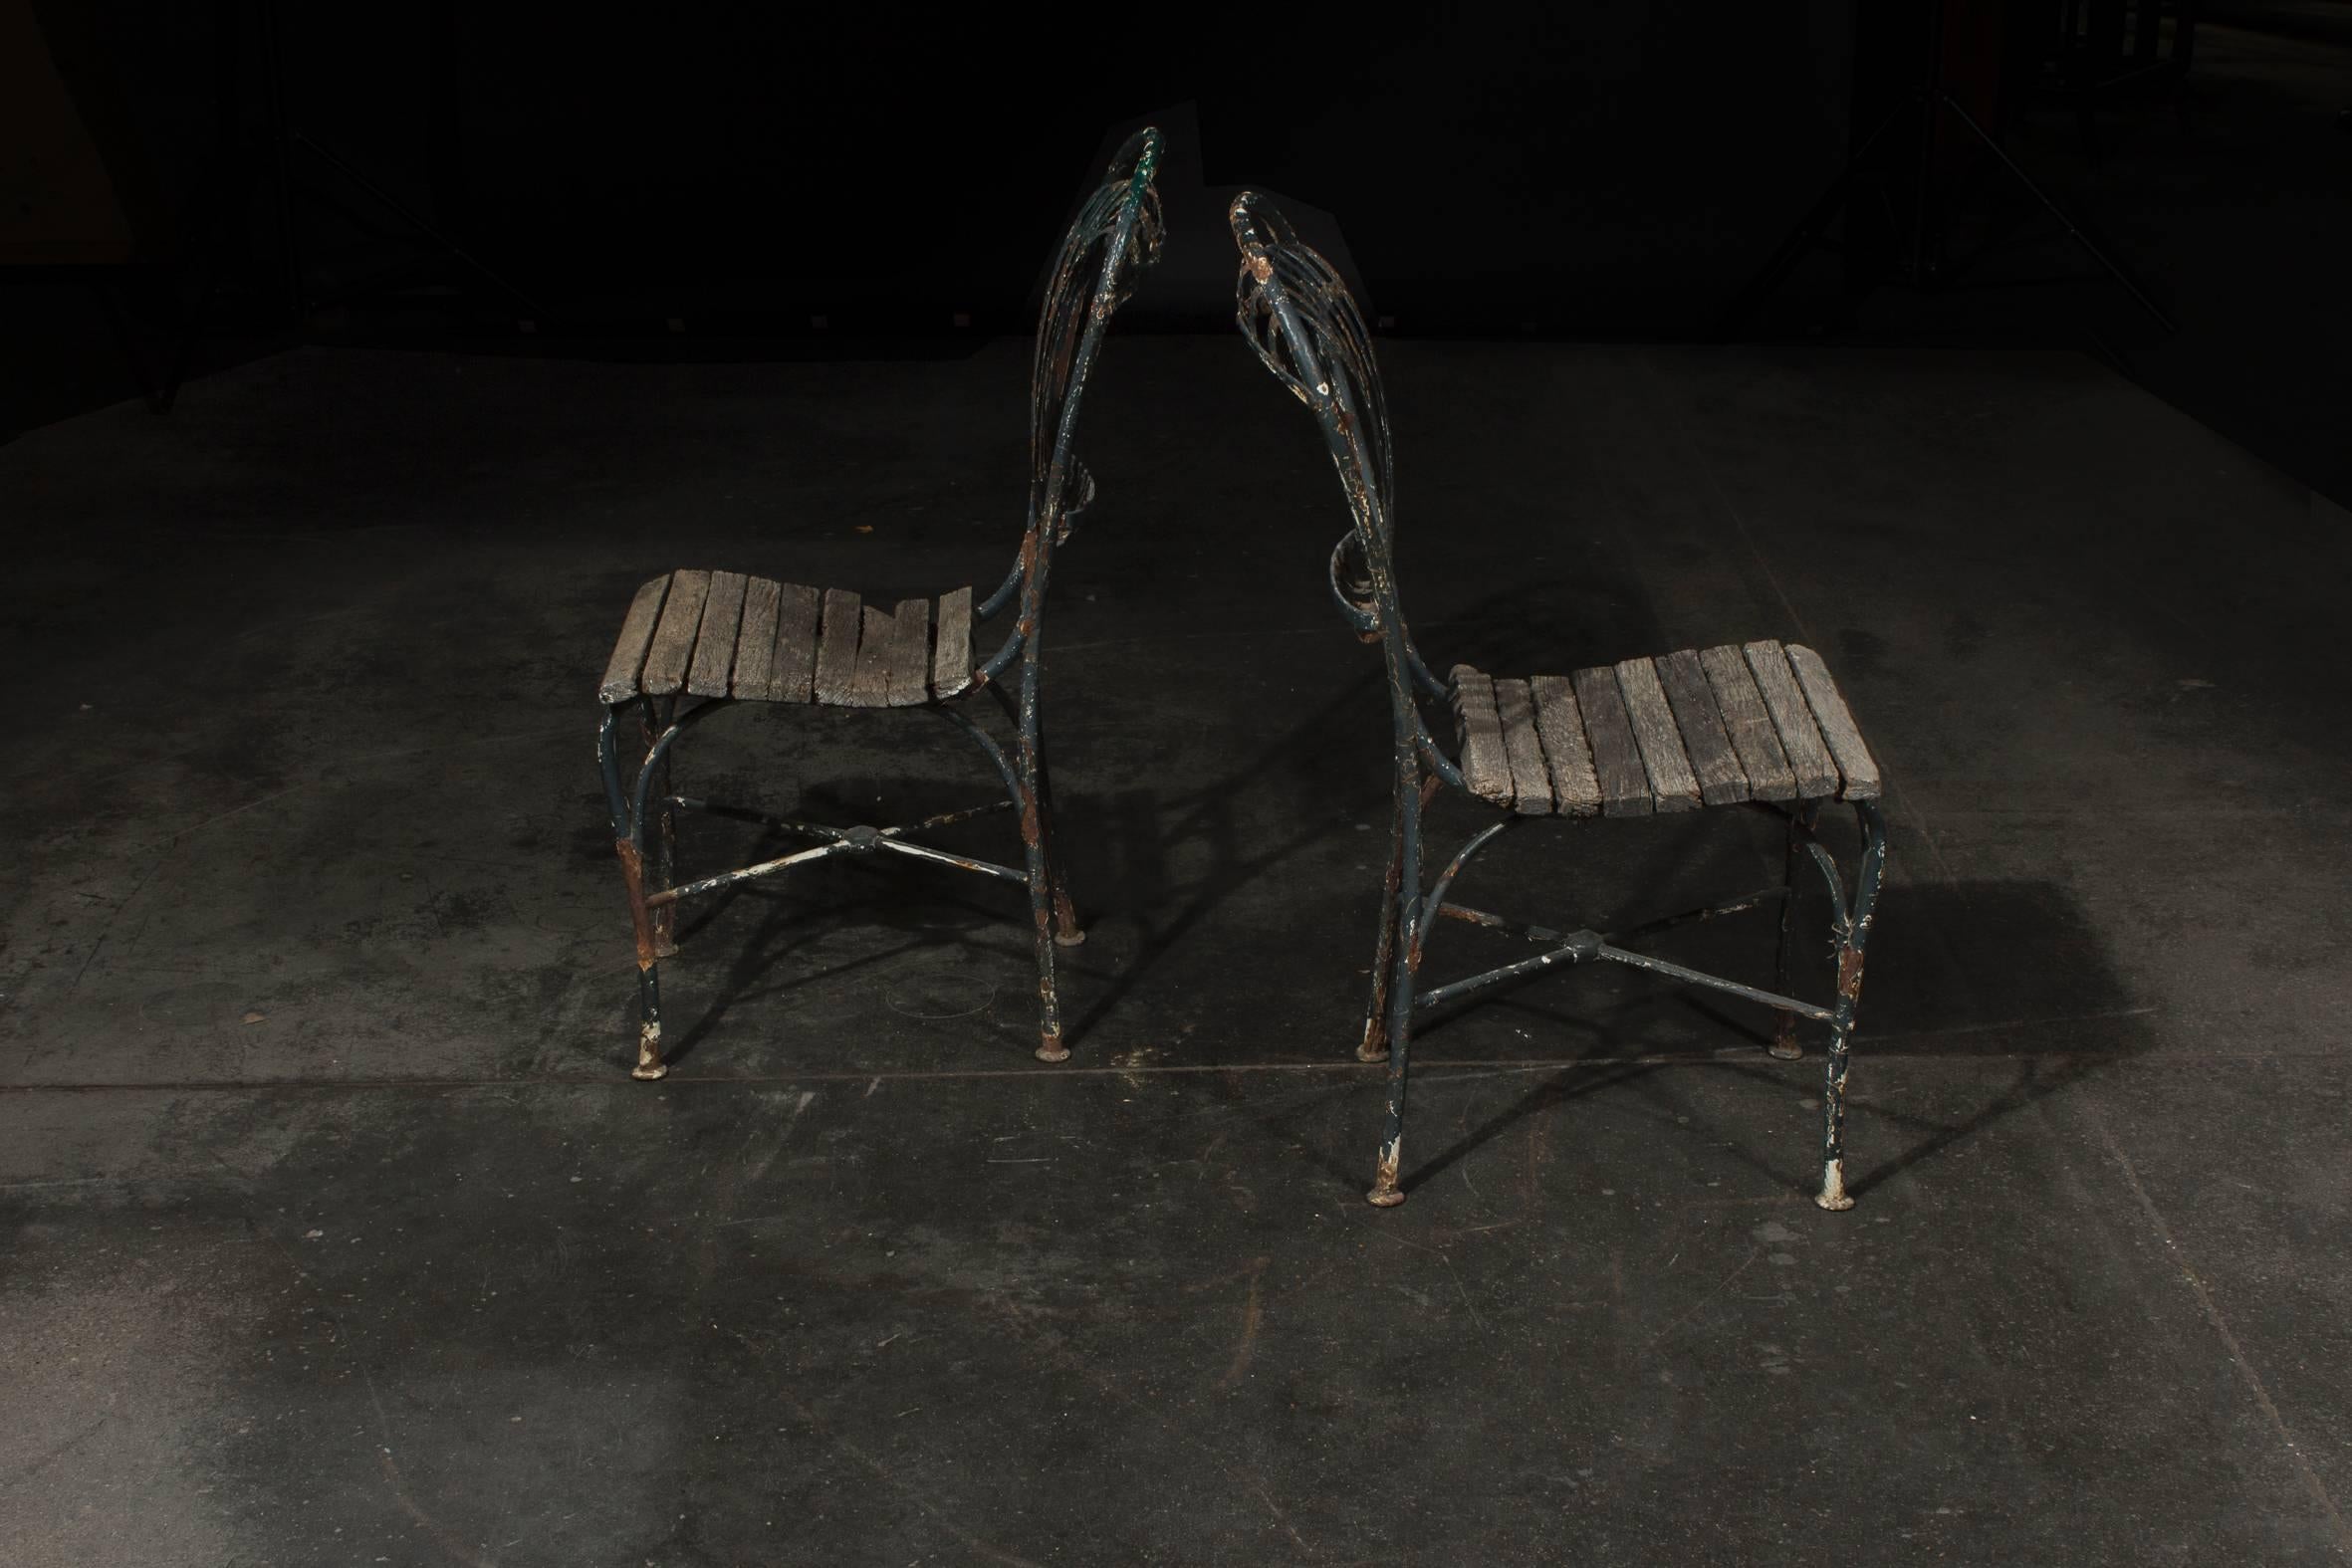 Mid-19th Century Two Iron and Wood Garden Chairs in Beautiful Aged Condition, circa 1860